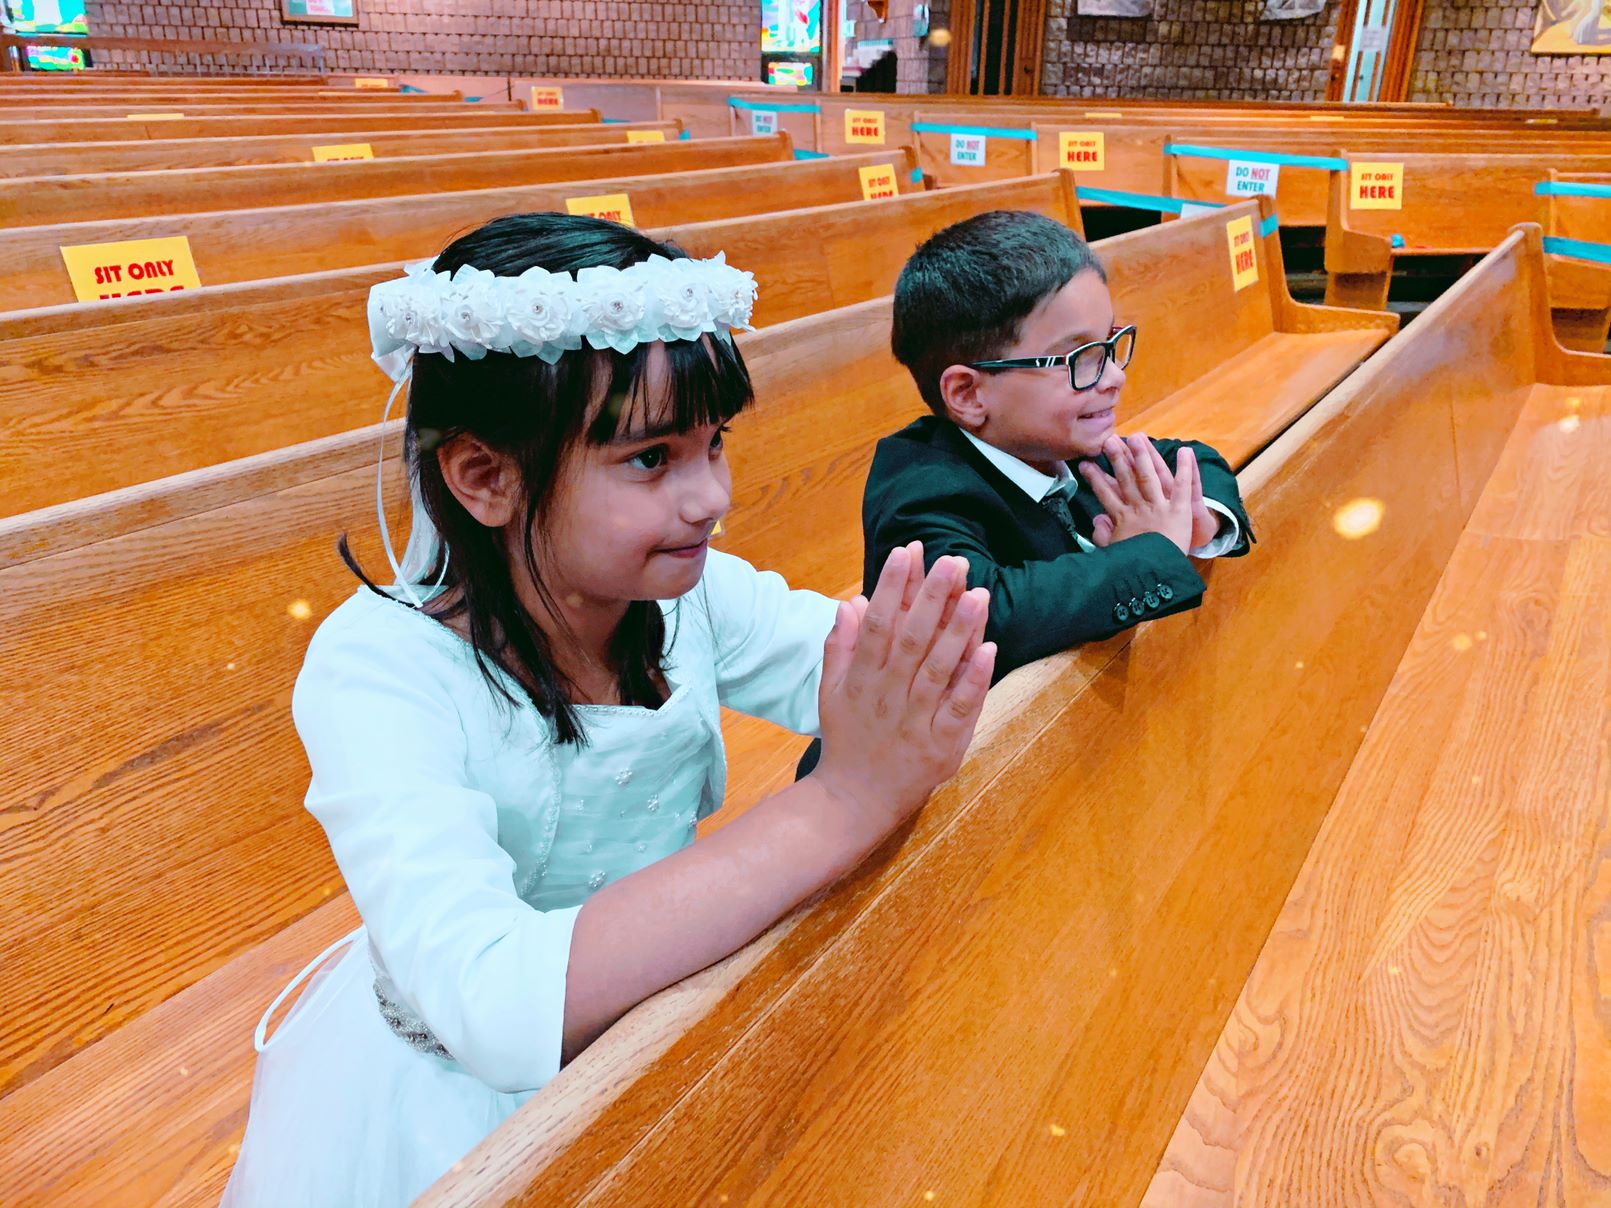 Communion students, boy and a girl, kneeling in the pews